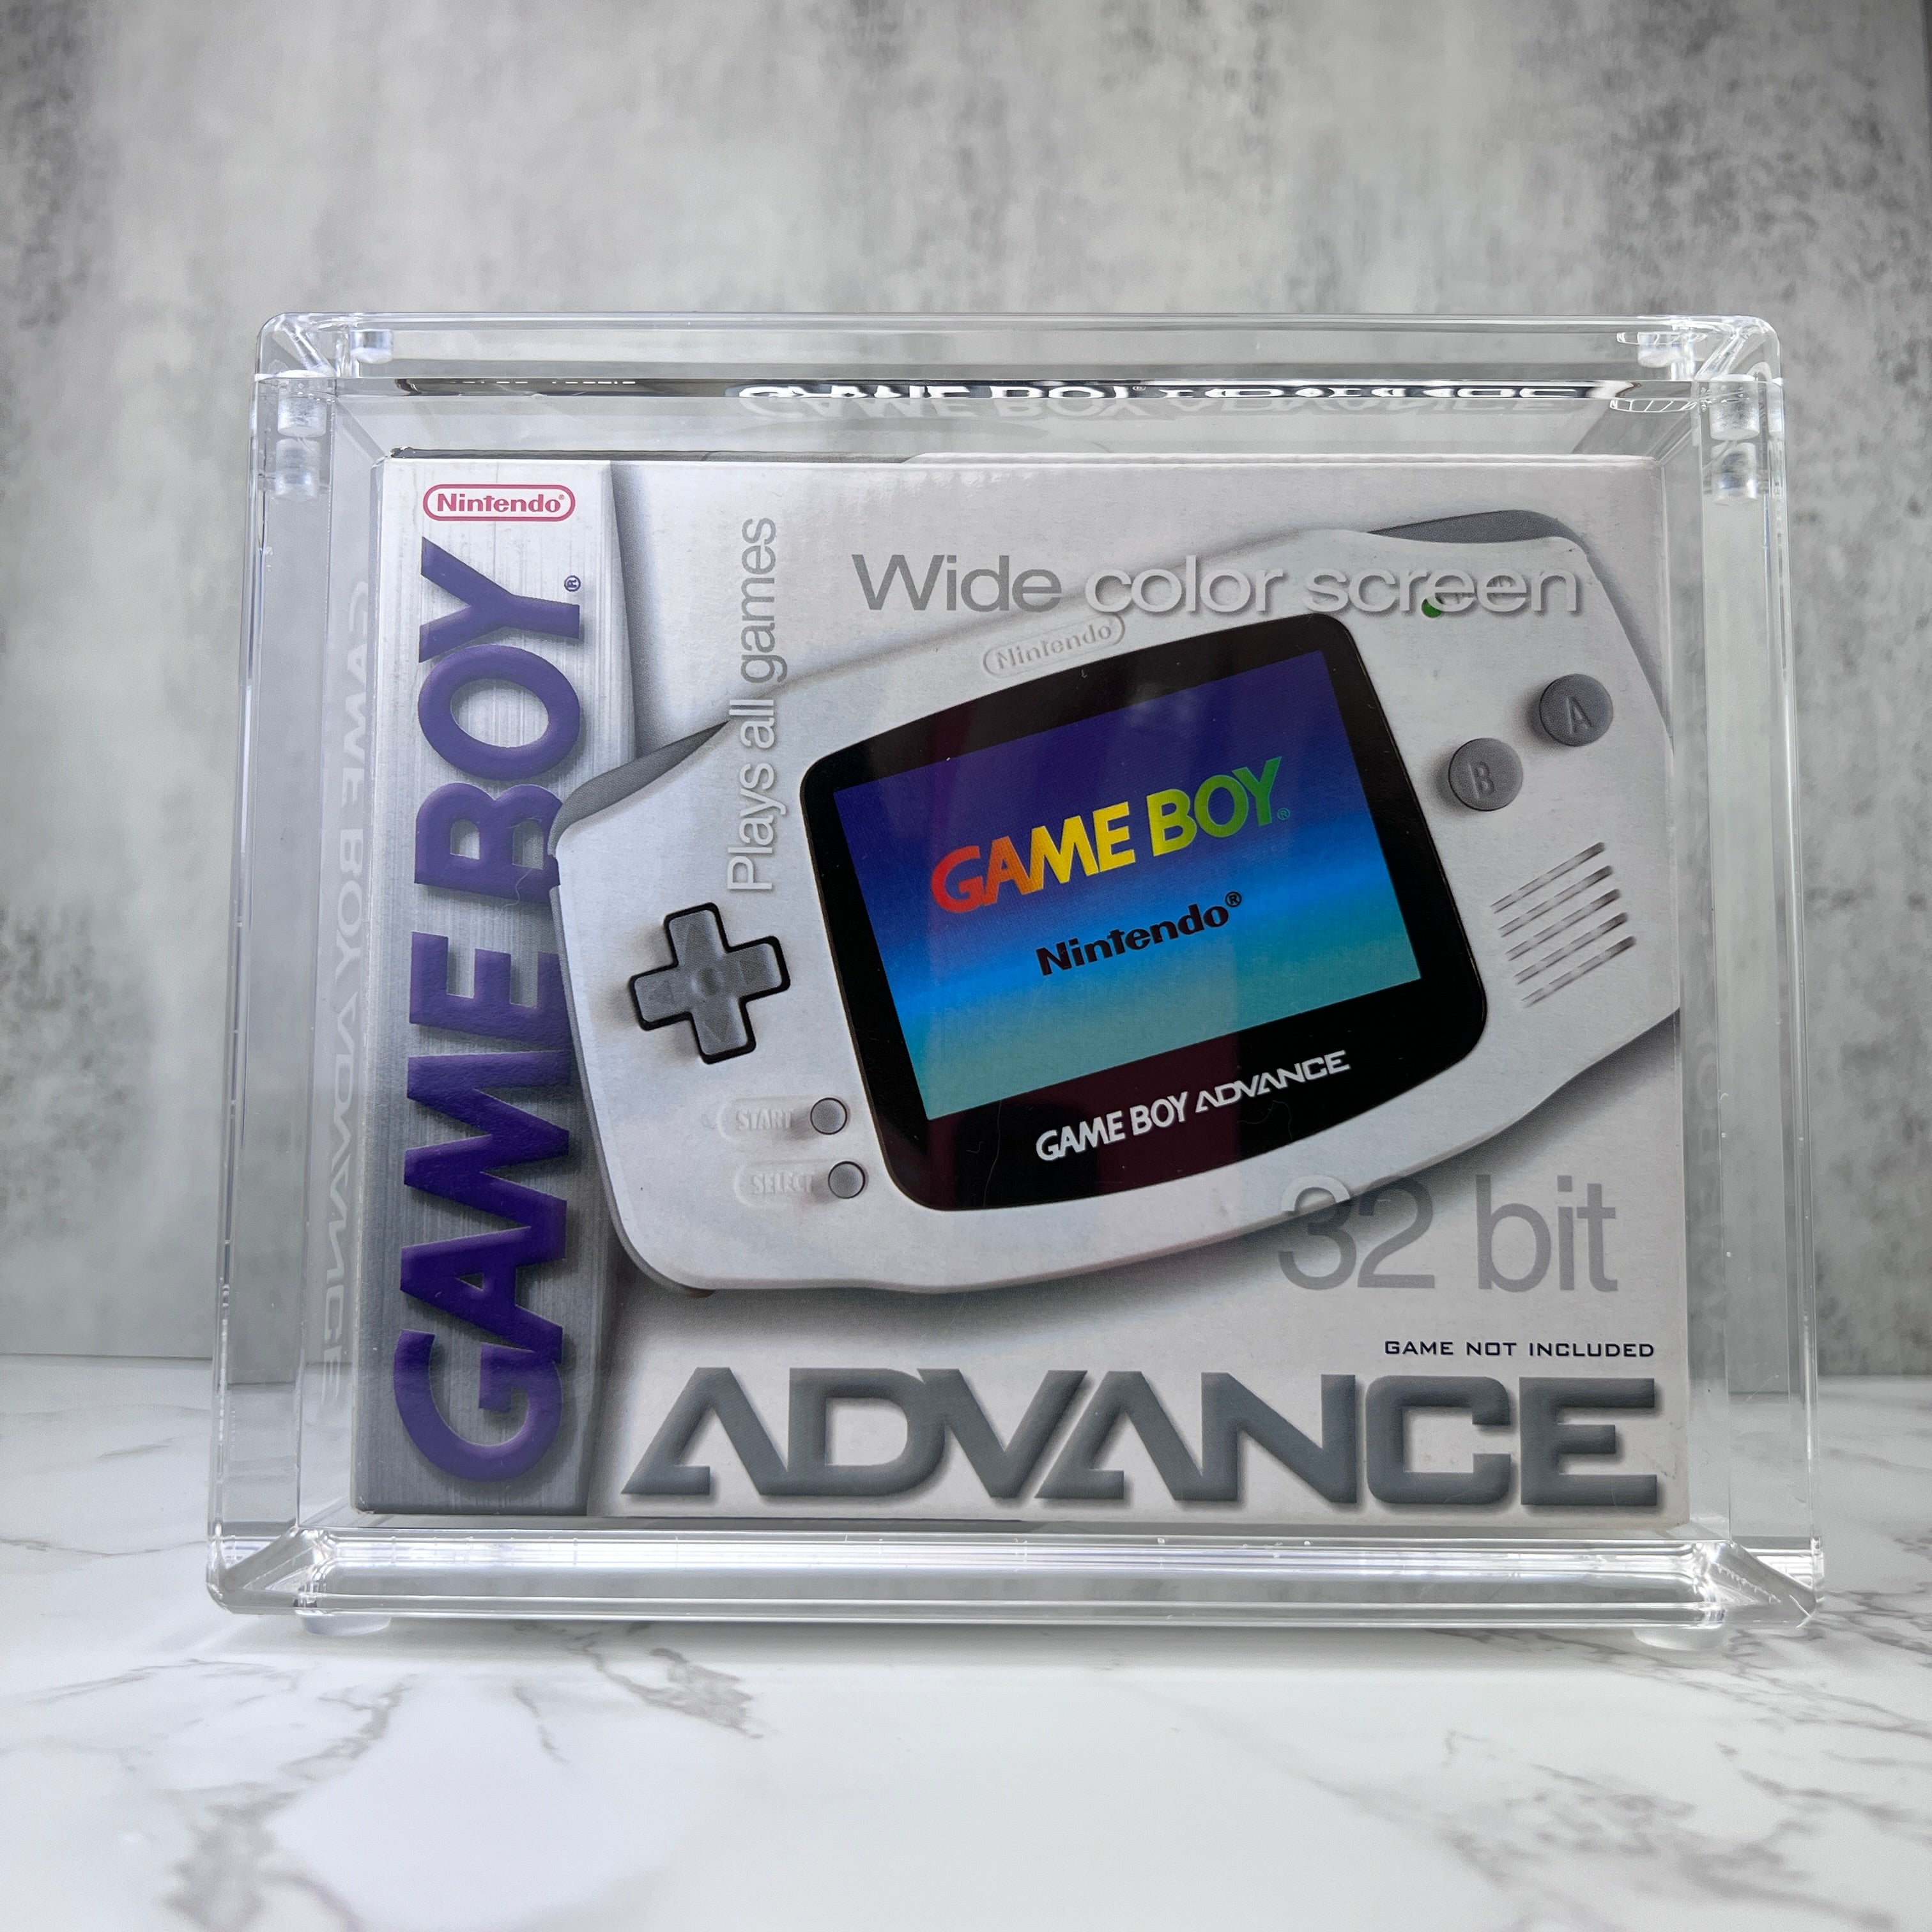 Gameboy Advance acrylic display cases are custom designed with strong neodymium magnets, UV resistant coating, maximum transparency and thick walls for years of heavy, trustworthy protection.